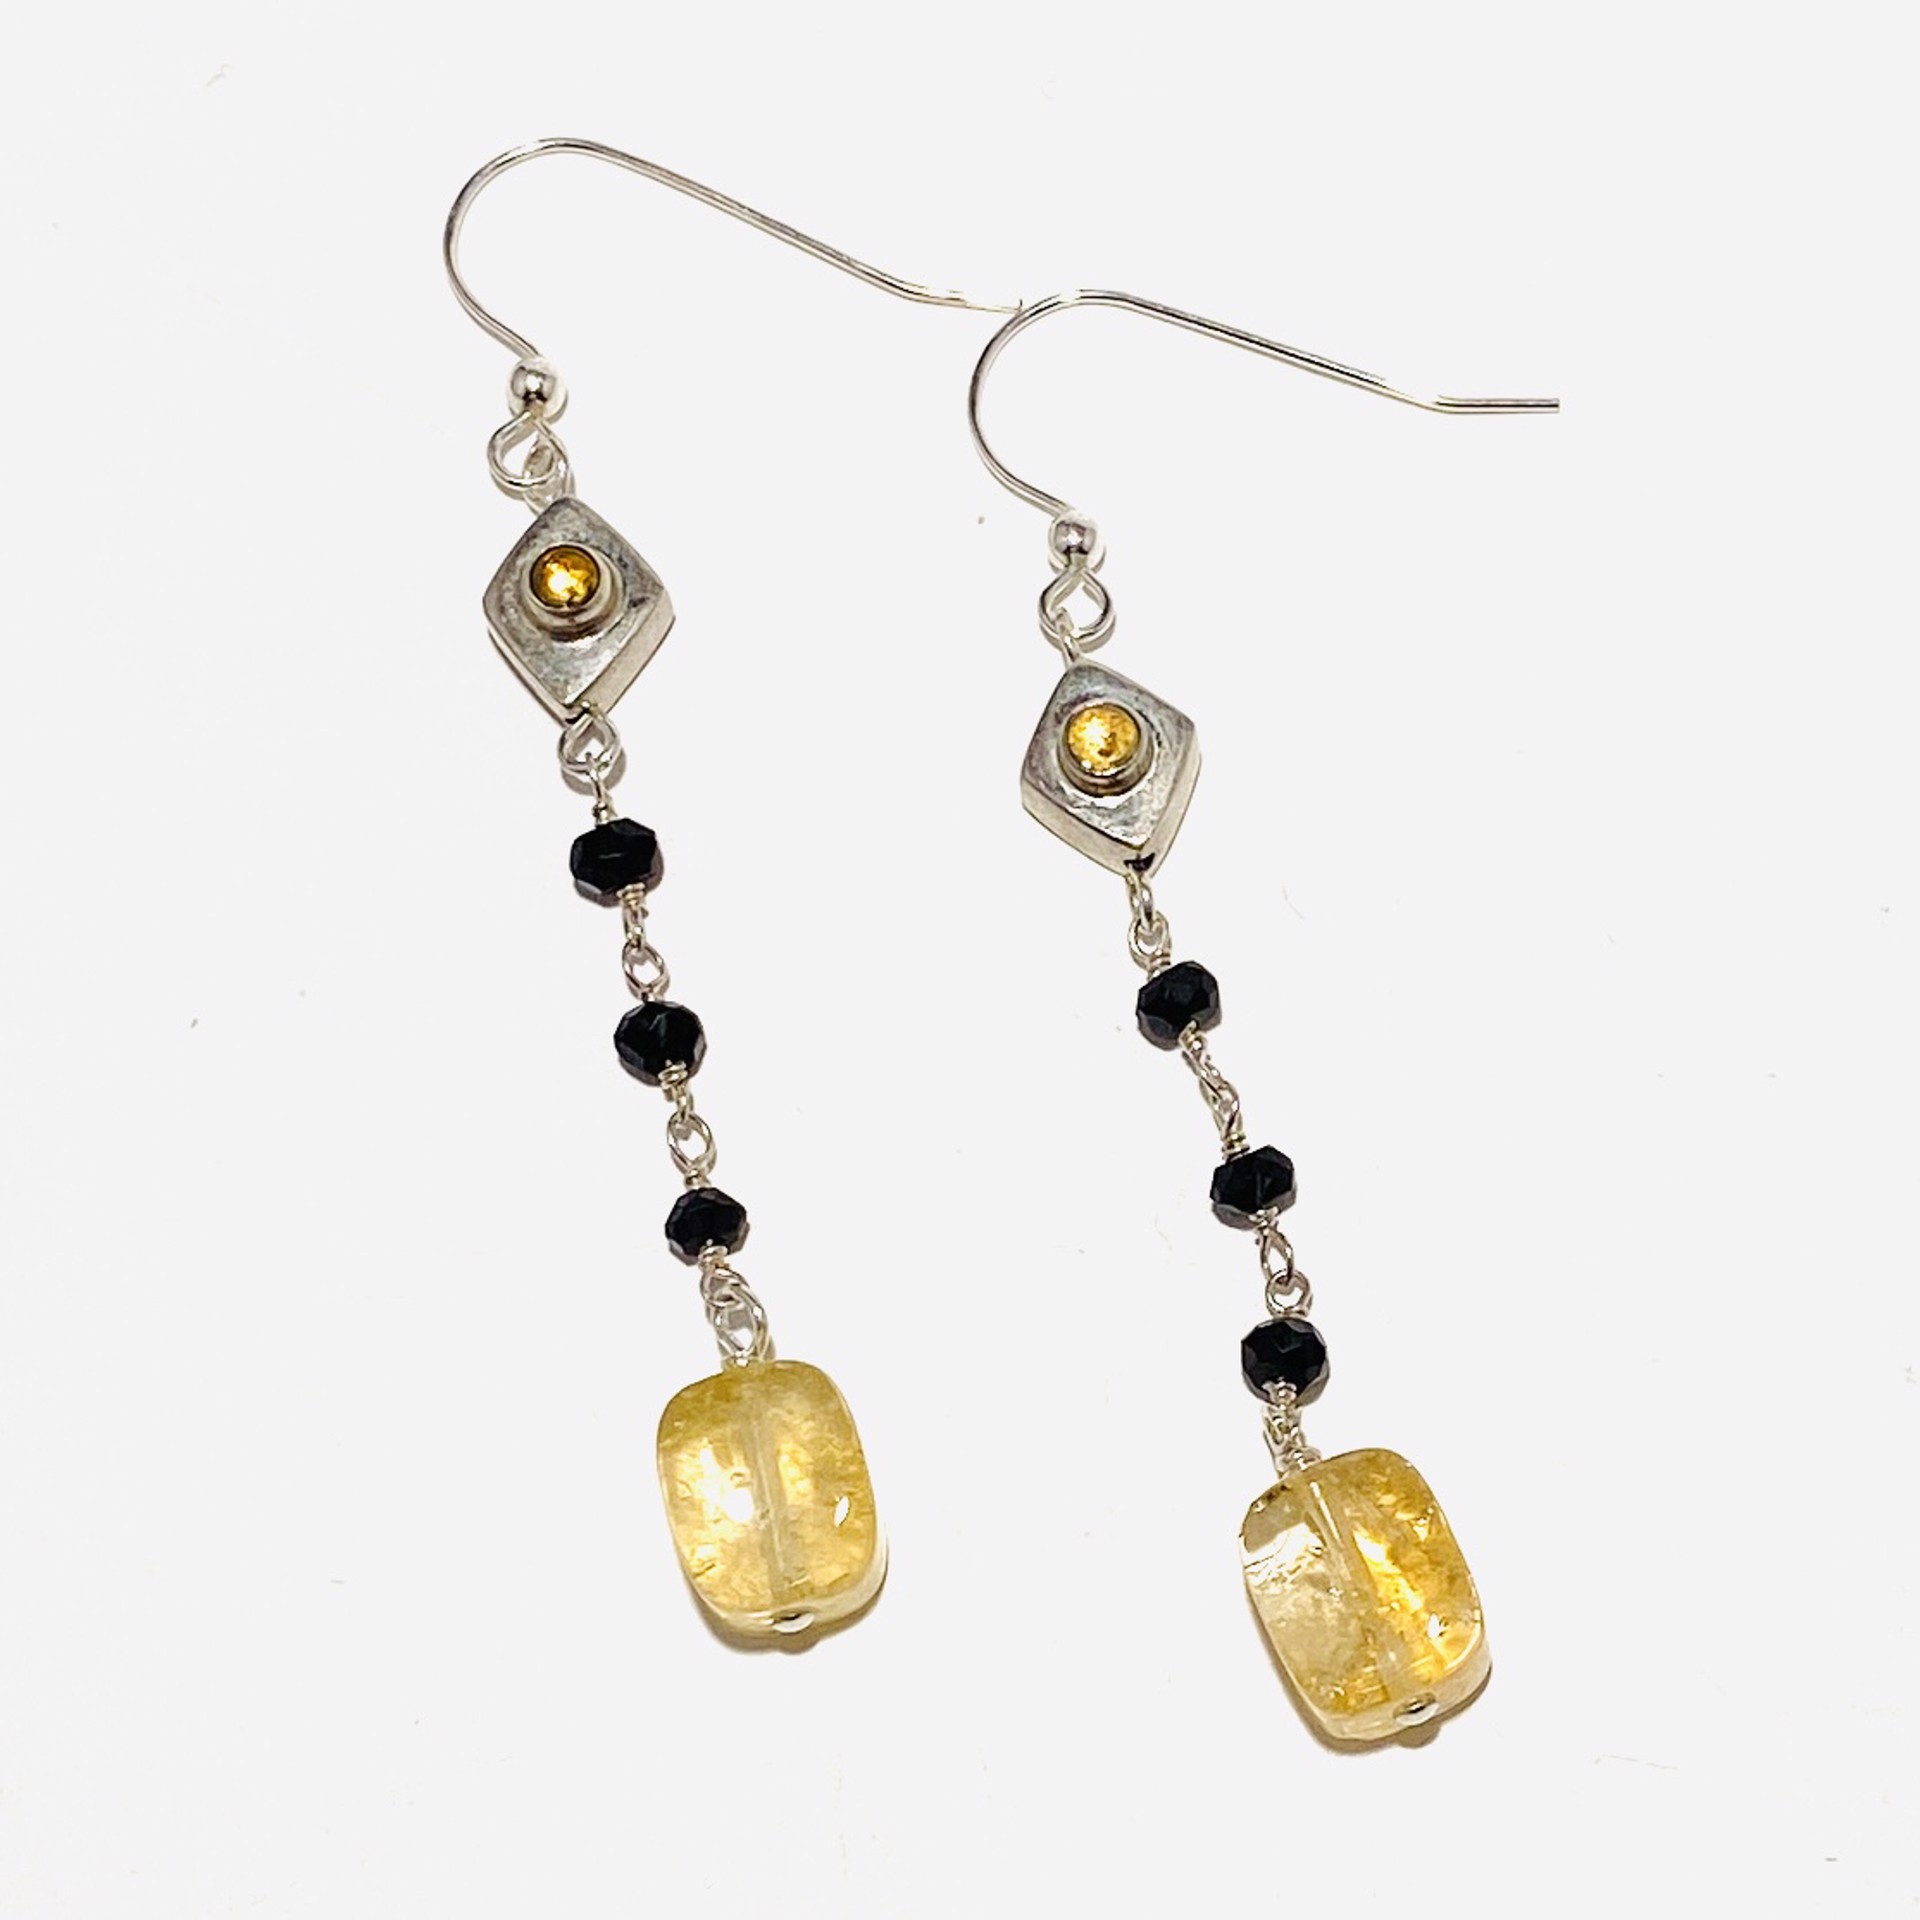 Sterling Framed Citrine, Citrine Drops, Onyx Chain Earrings LR23-14 by Legare Riano